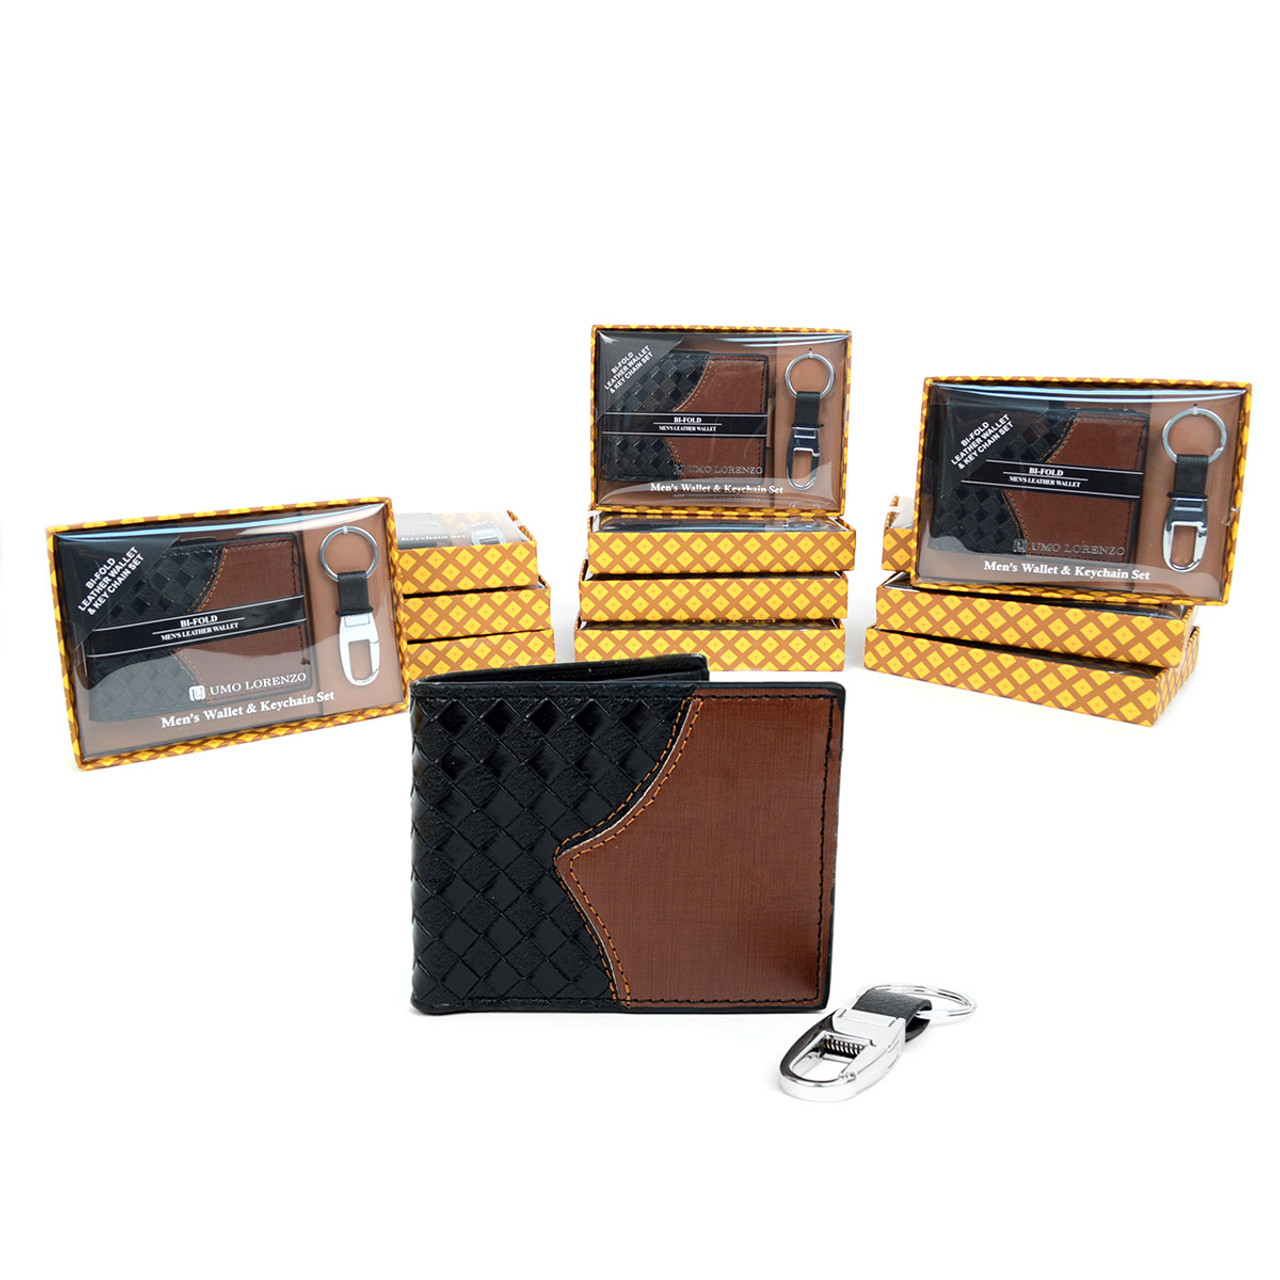 12pc Black Woven Leather Wallet with Stitched Trim & Keychain Set WKB17101